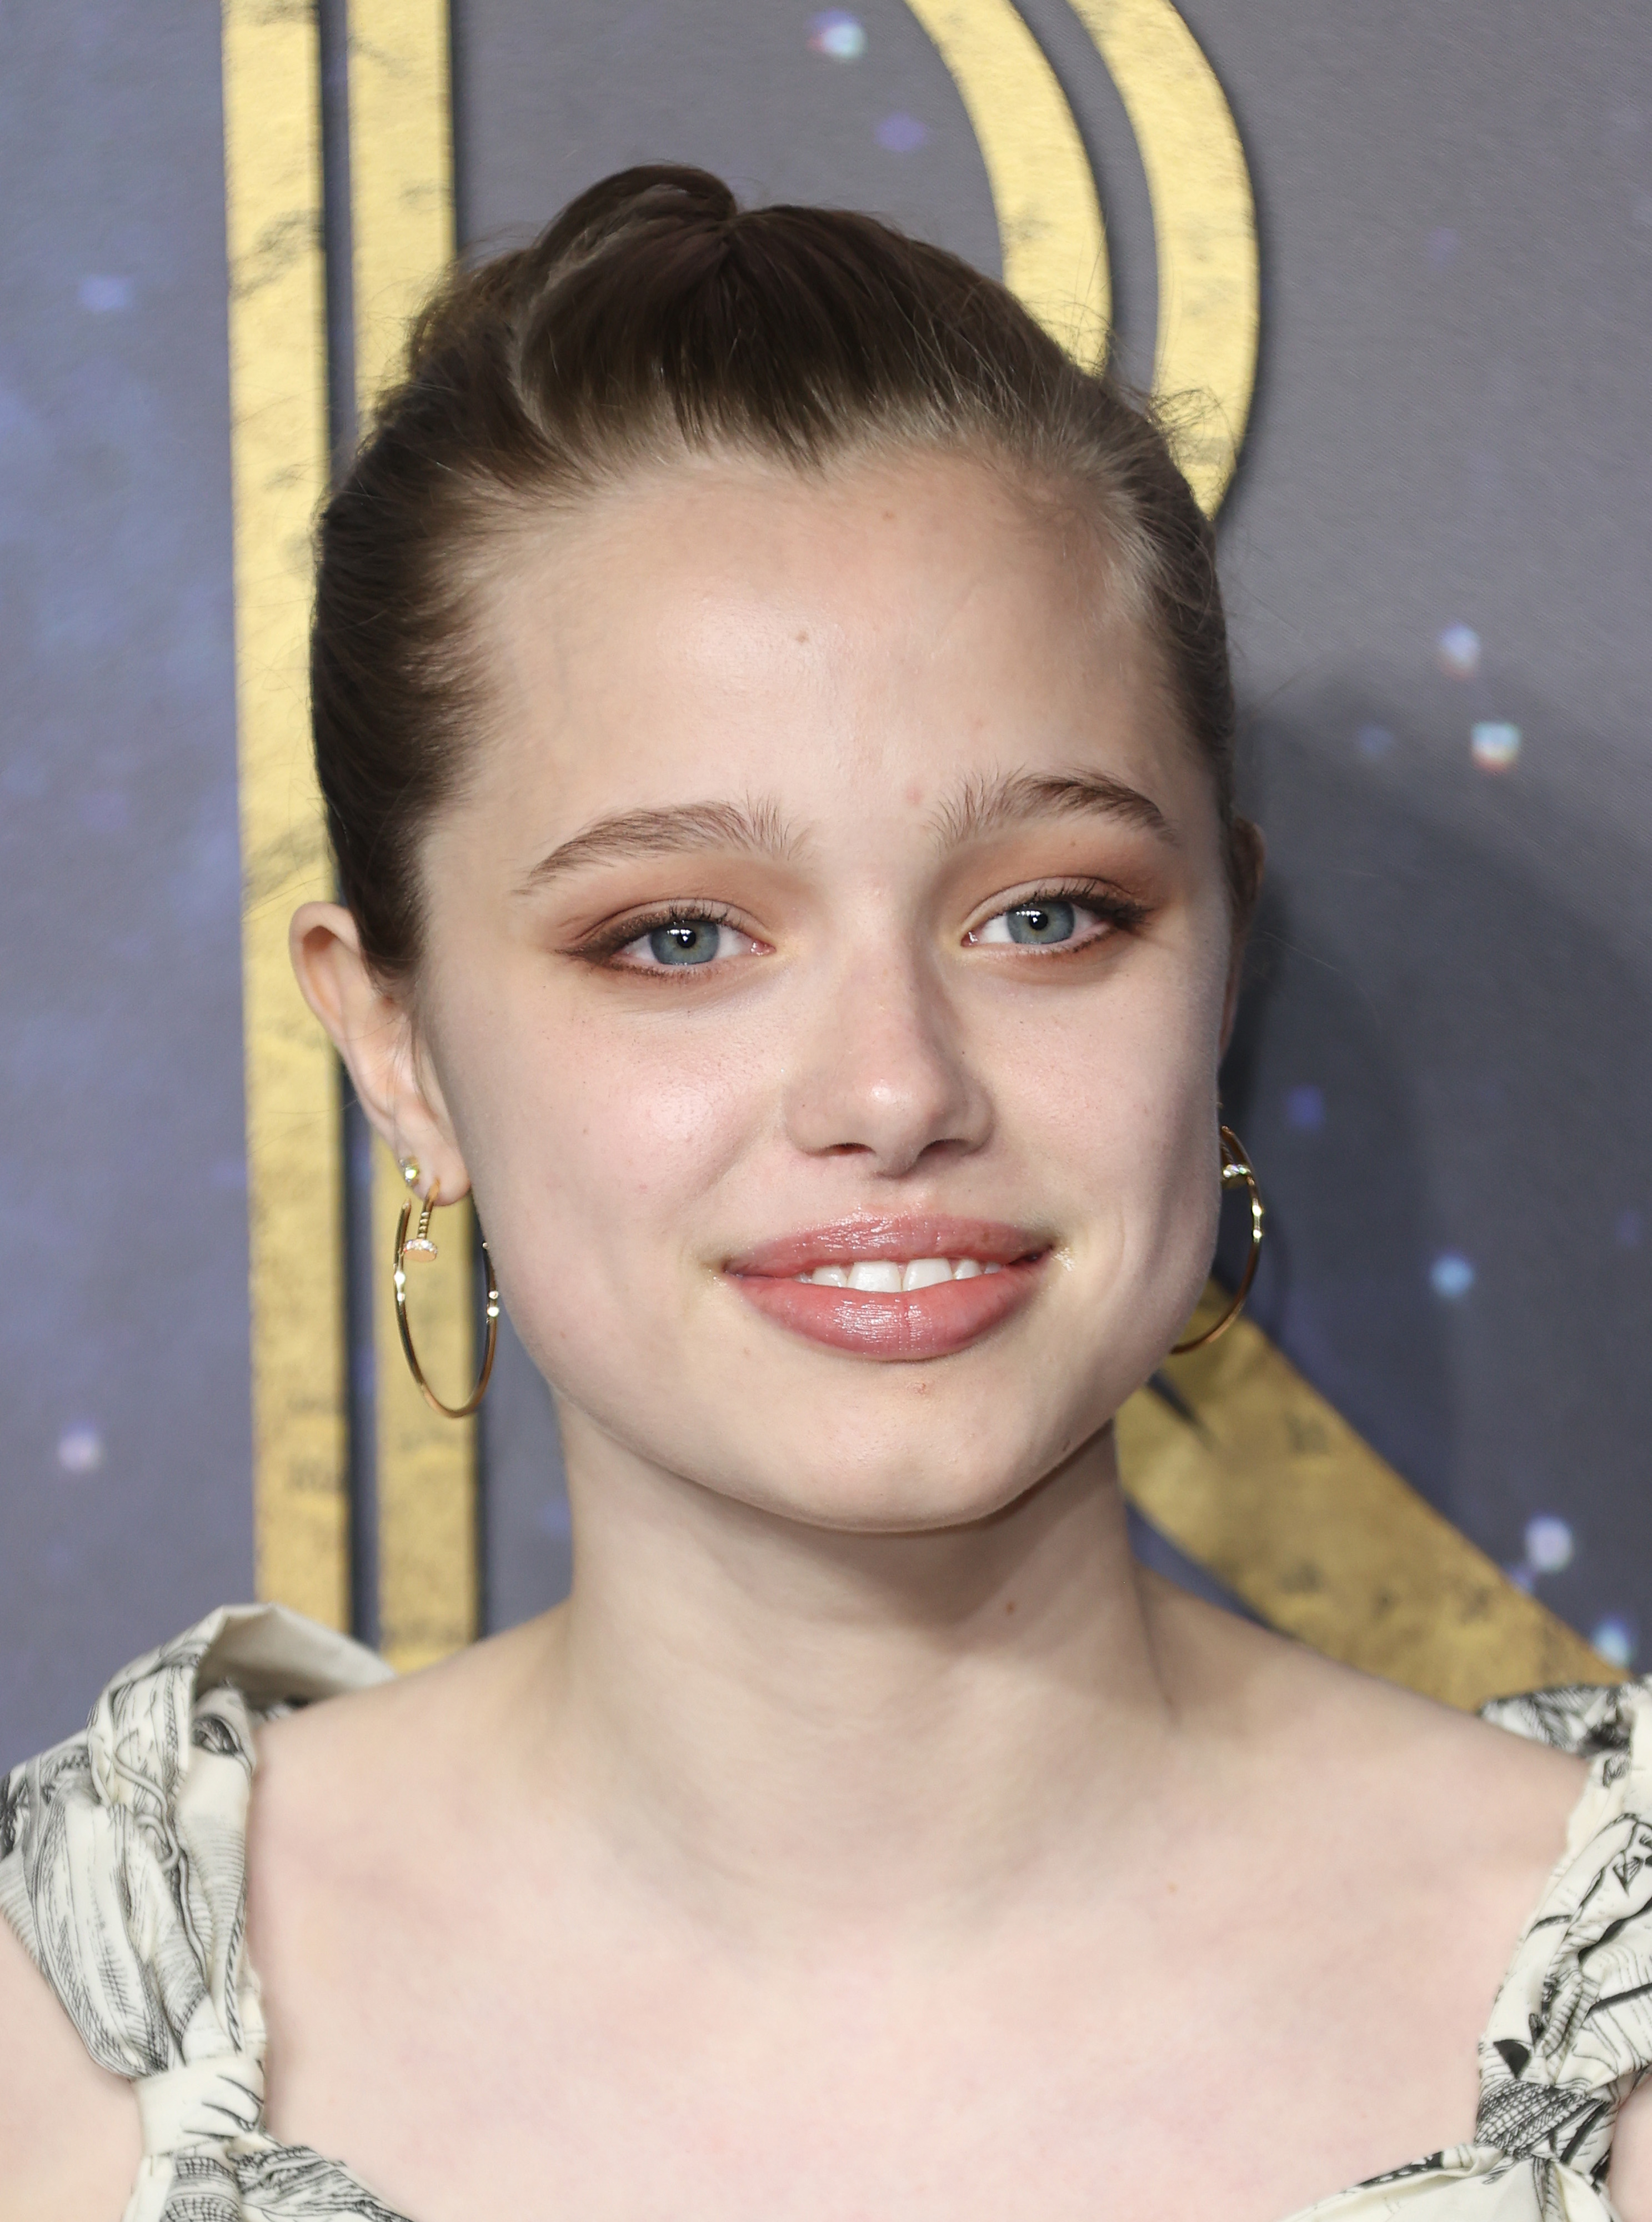 Brad Pitt’s Daughter Shiloh, 16, Is Allegedly Dating — Mom Has to